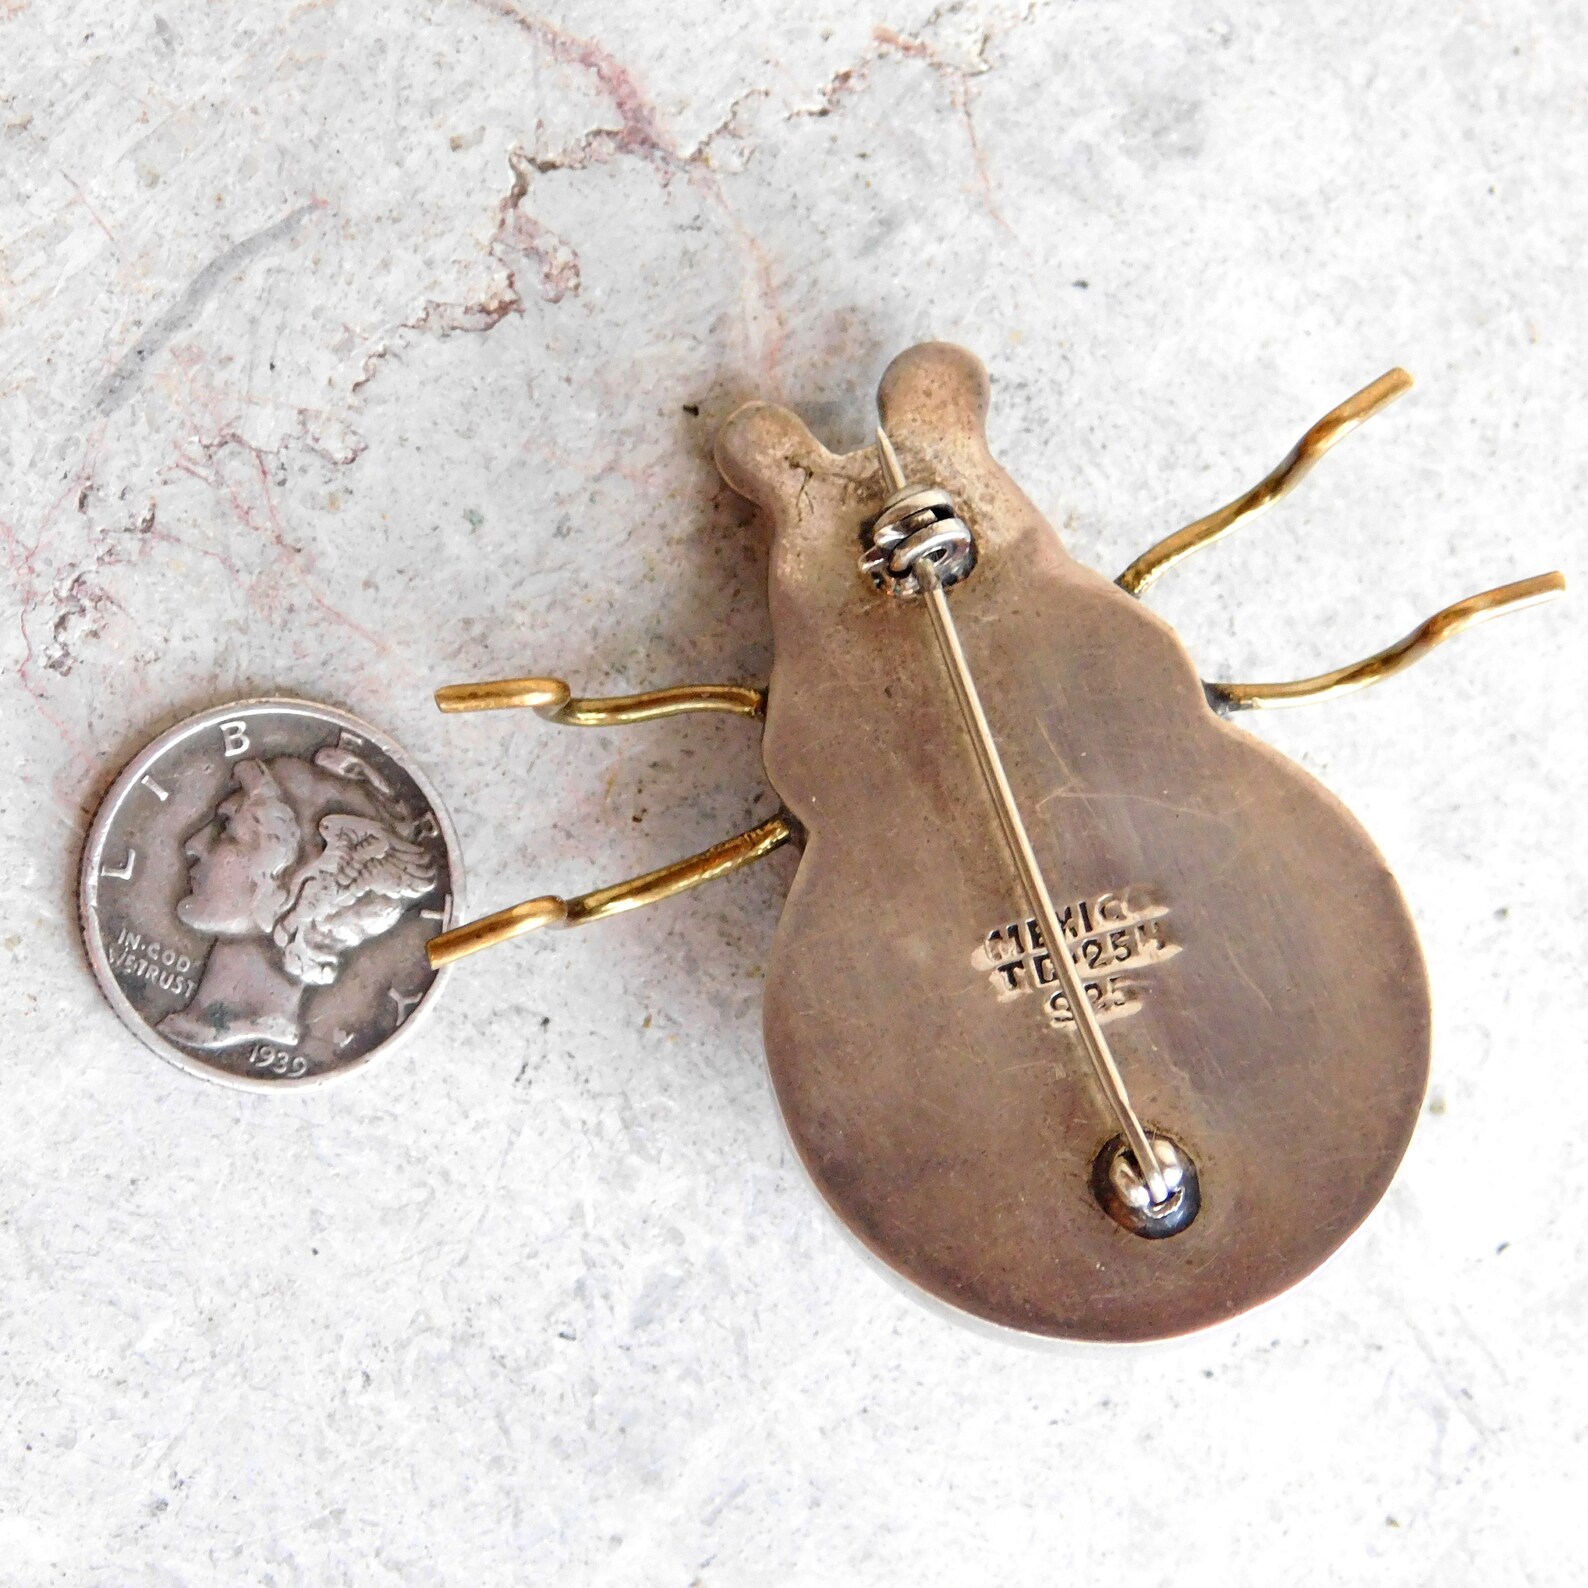 Vintage Mexican Sterling Silver and Goldtone 3-D Bug Brooch - Etsy